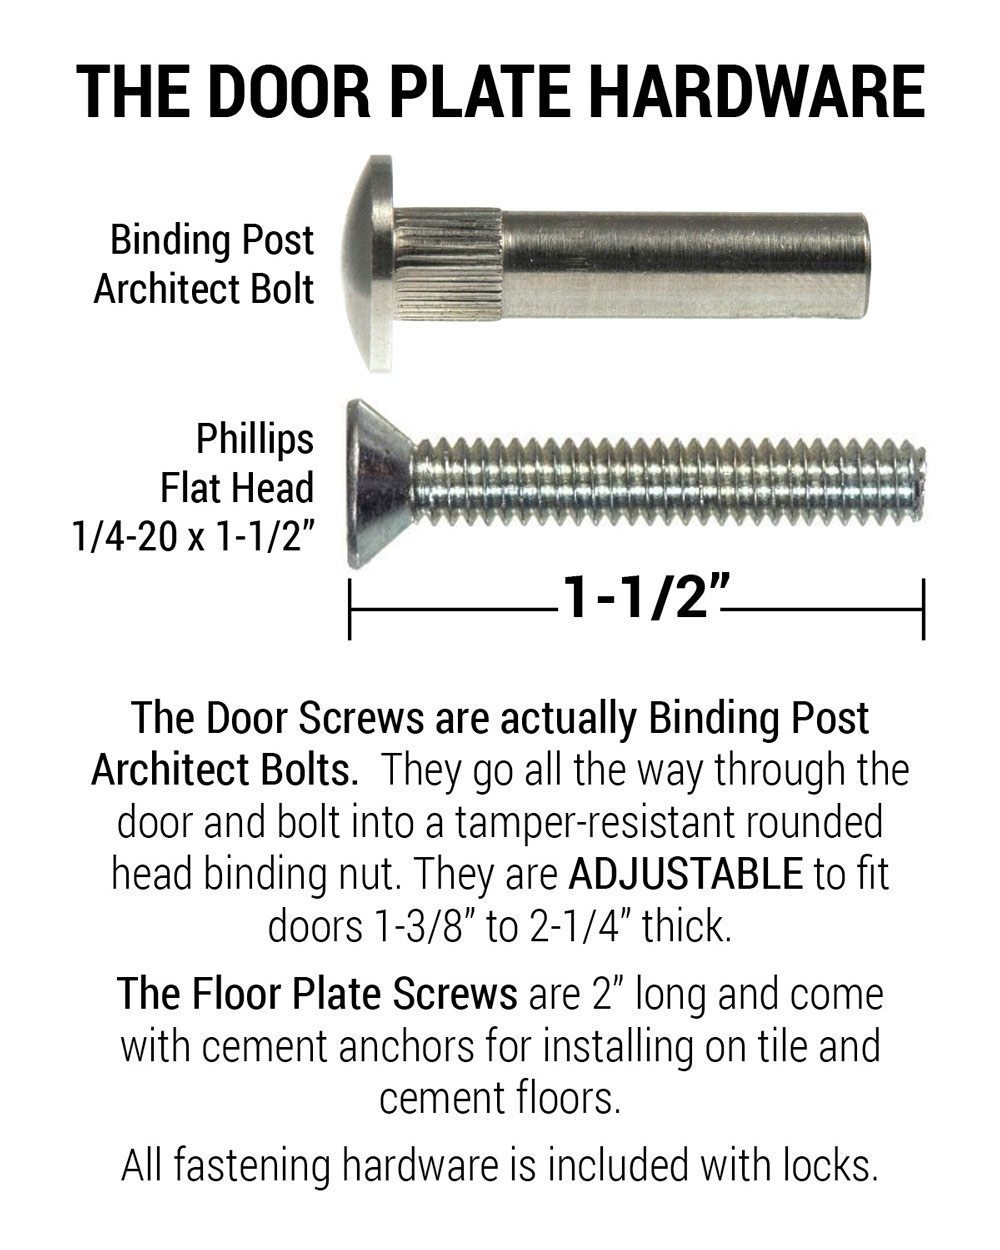 Hands Free Door Opener – Bolts Included Works with: Metal, Steel, Aluminum, Wood Doors up to 1-3/4” Thick 